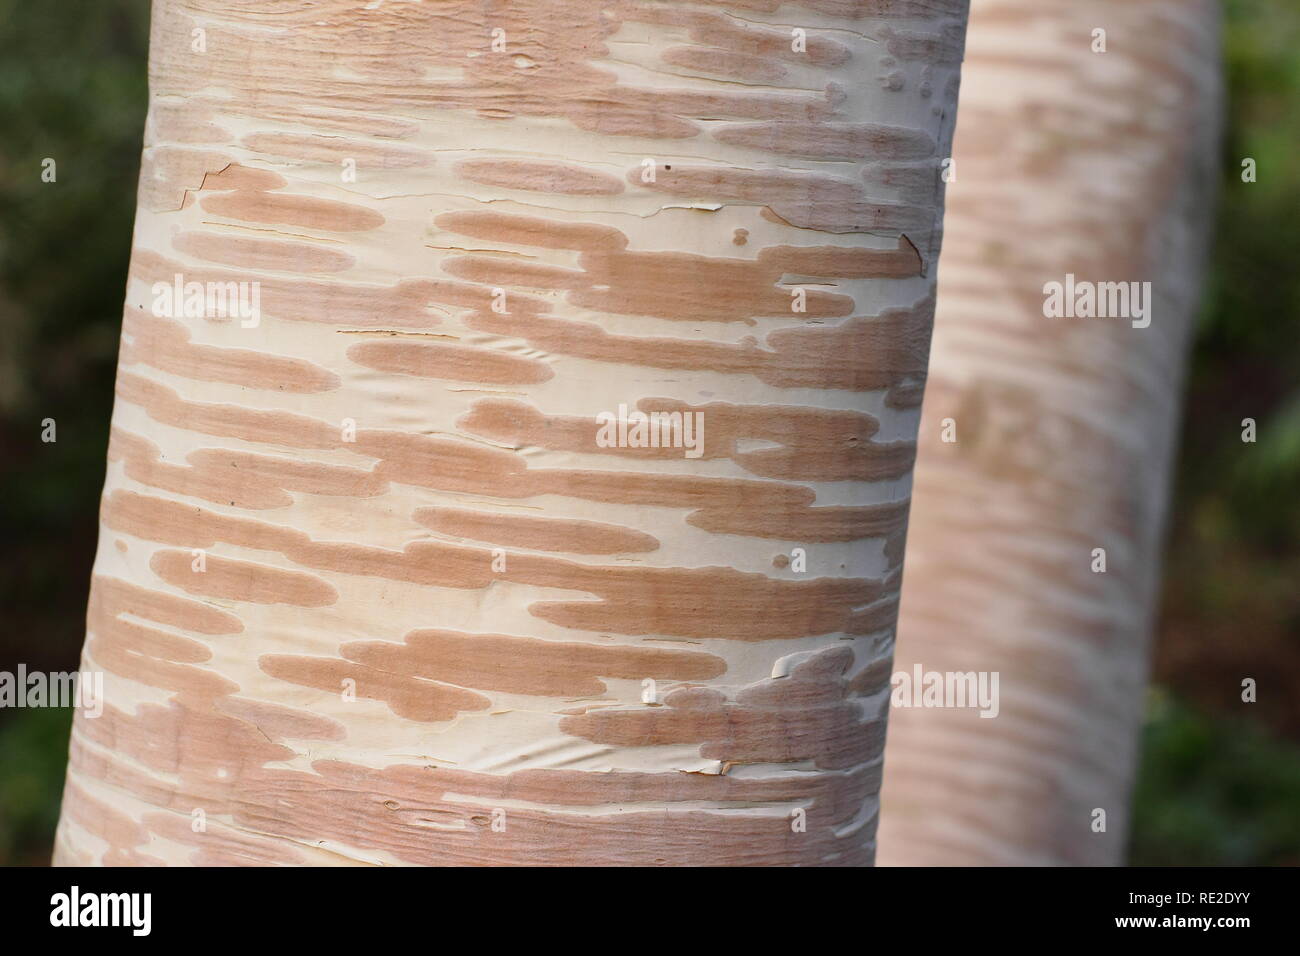 Creamy white and pink bark of Betula ermanii 'Grayswood Hill' birch tree in winter, UK. Also called Erman's birch. Stock Photo